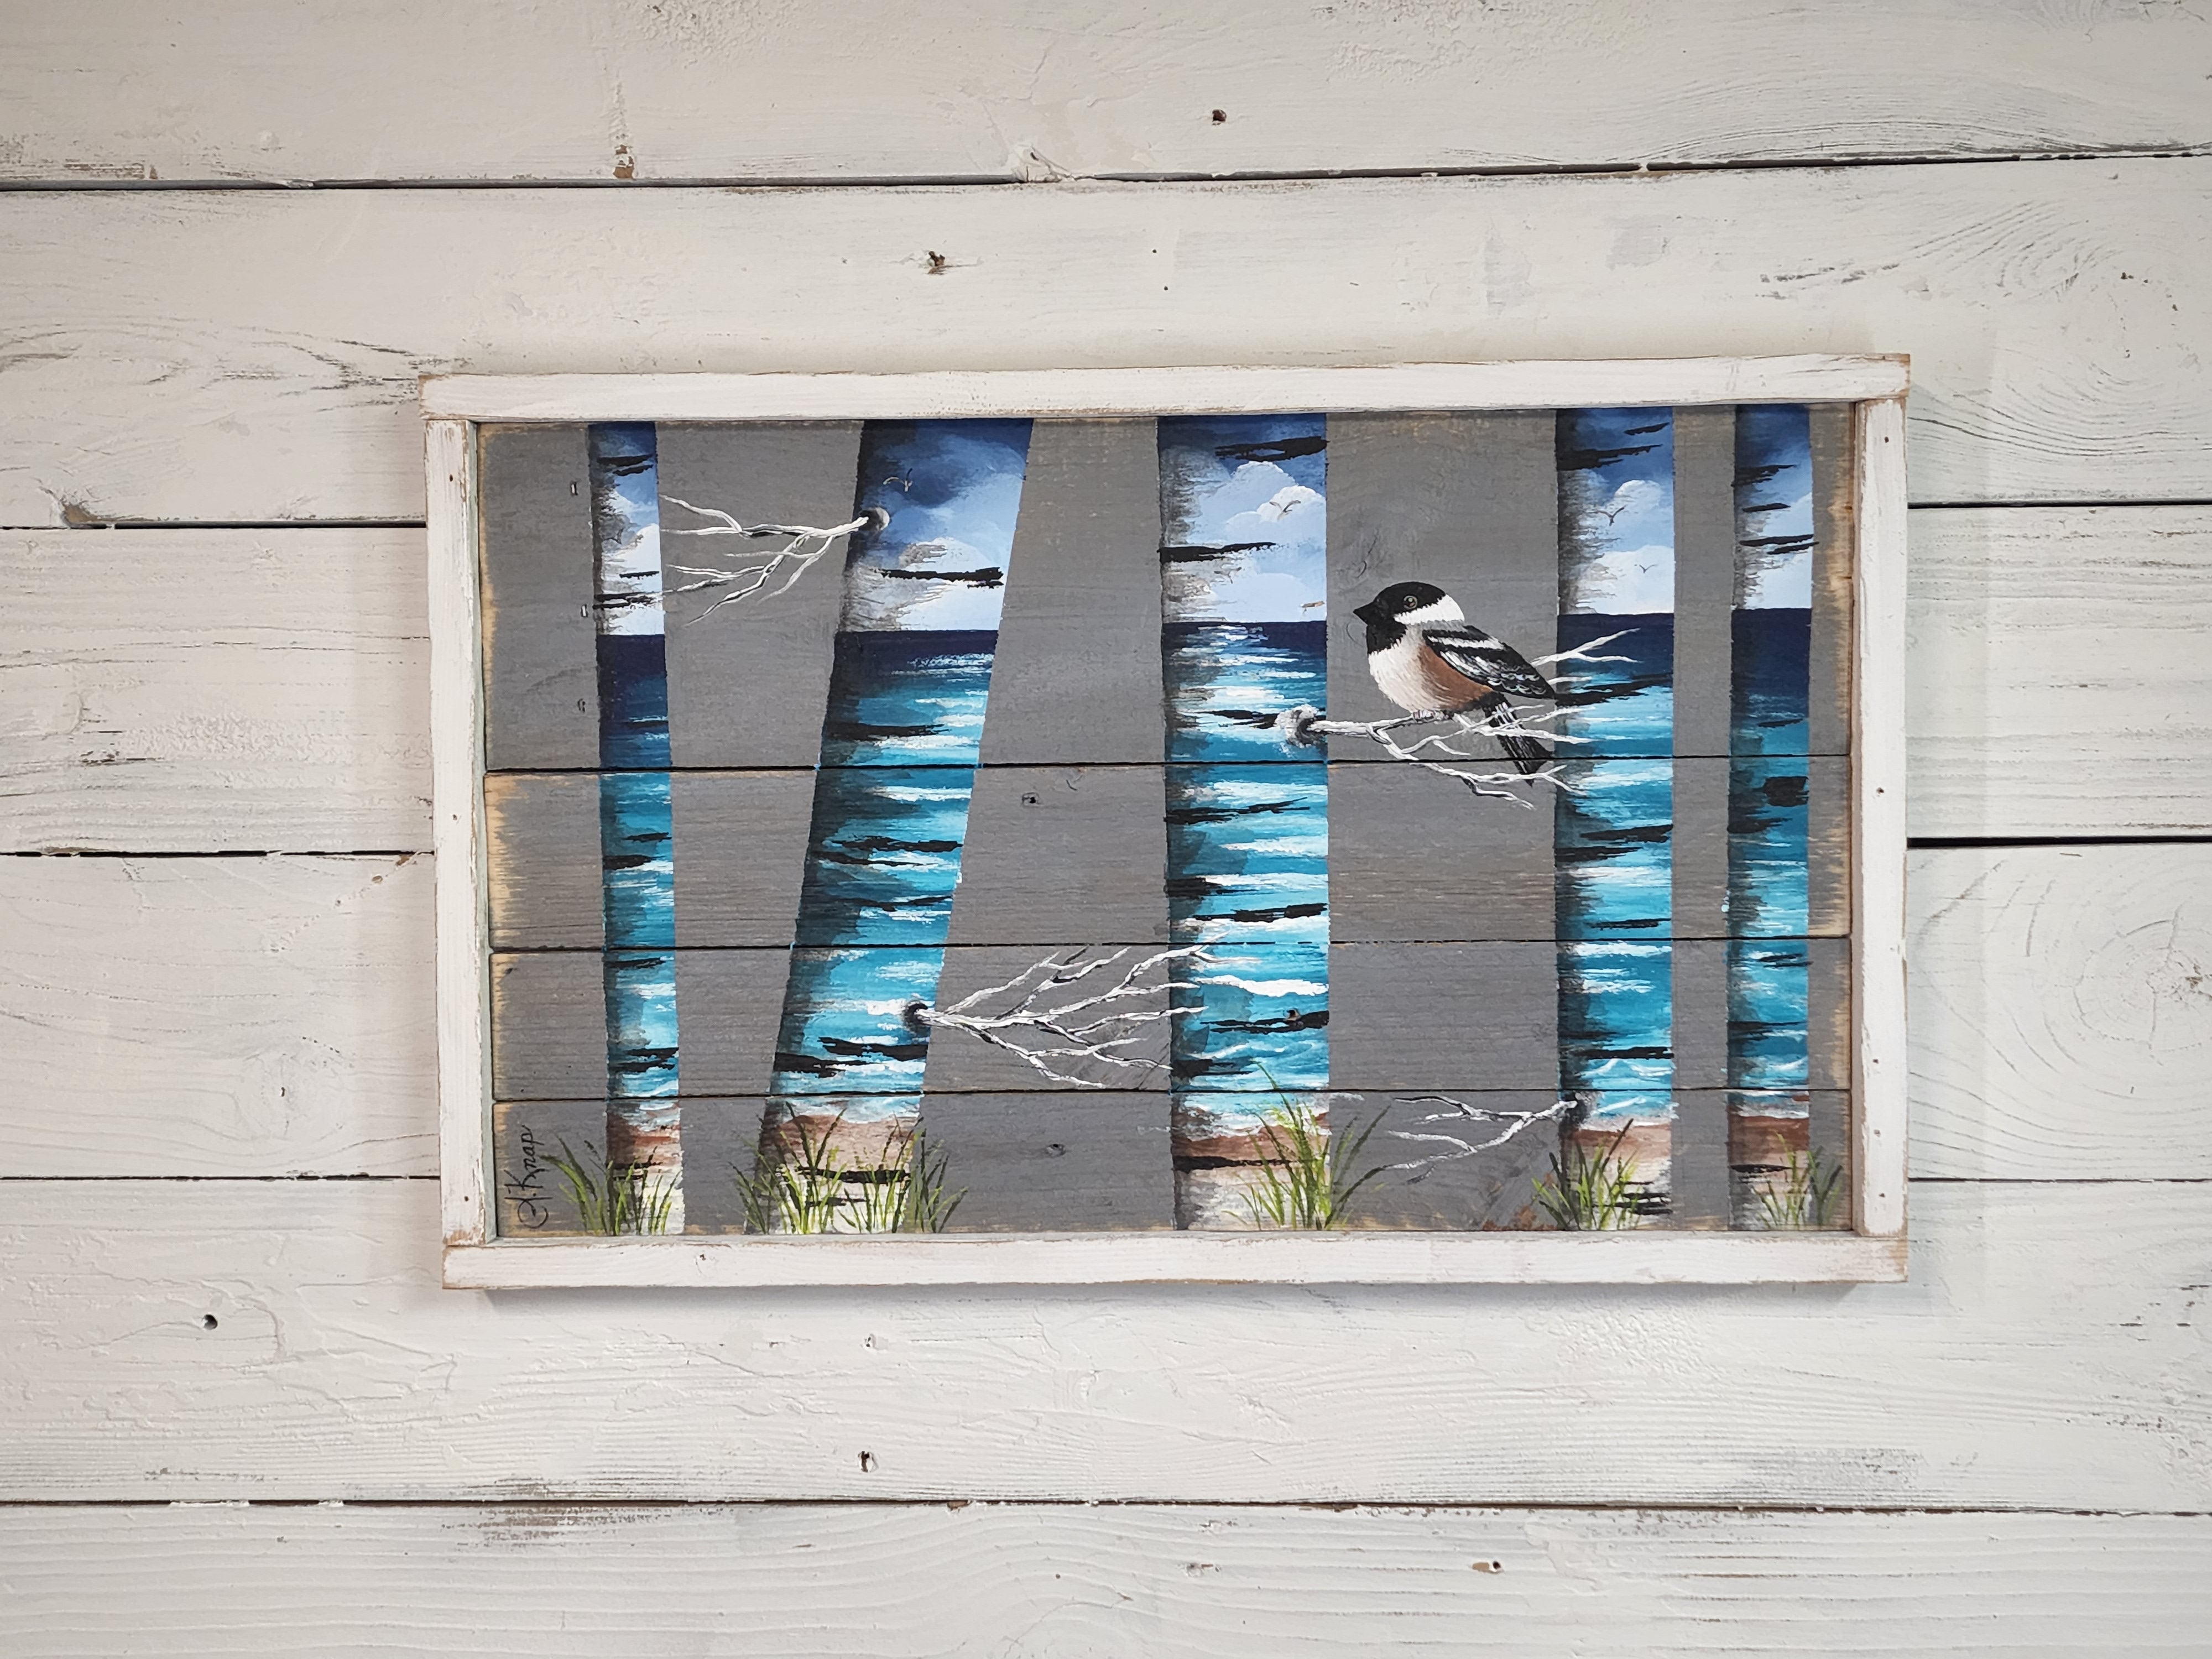 Abstract White Birch wall art Painting, part of "Birch Reflections" collection, Beach painting on pallet wood, cottage grey decor